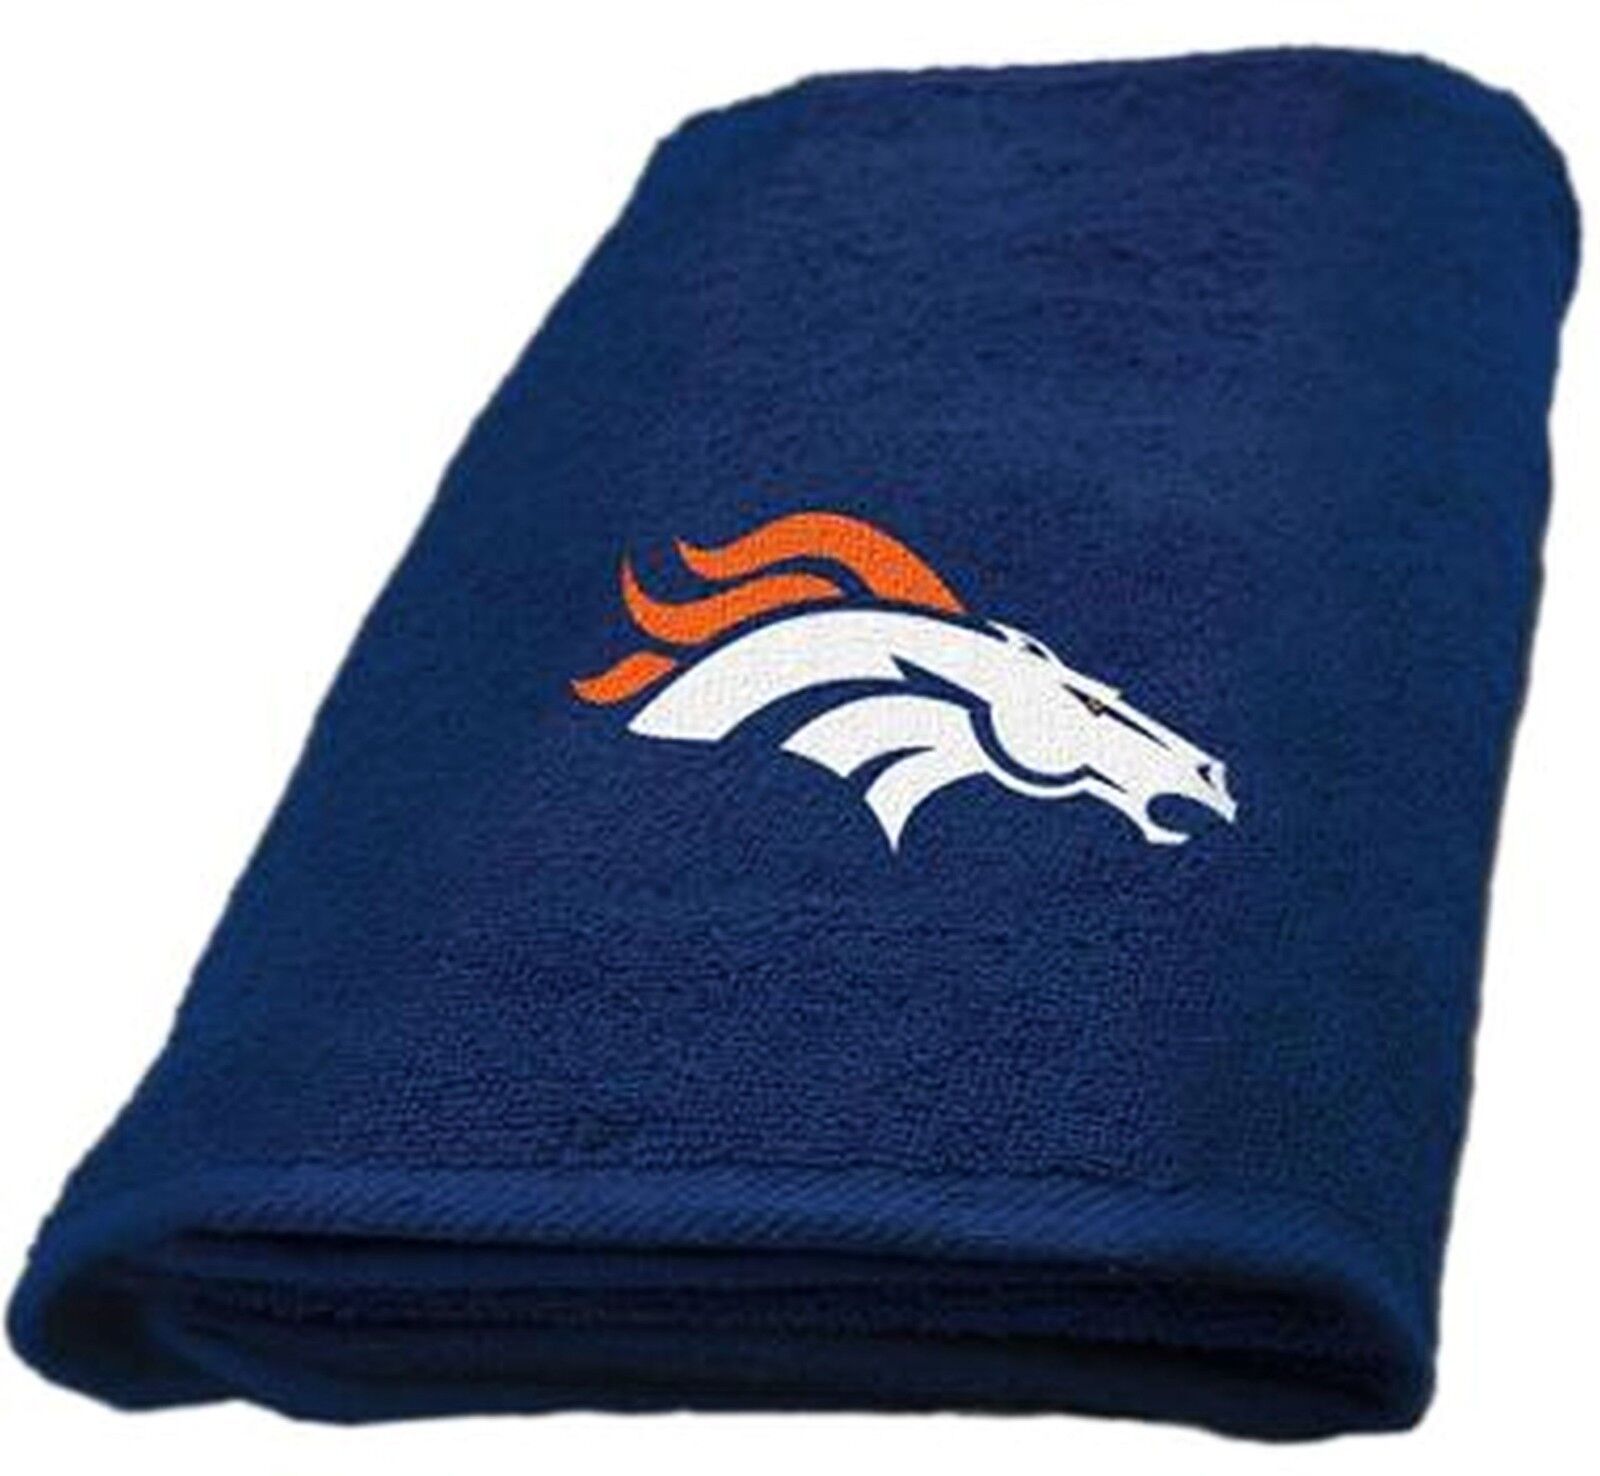 Primary image for Denver Broncos Hand Towel measures 15 x 26 inches